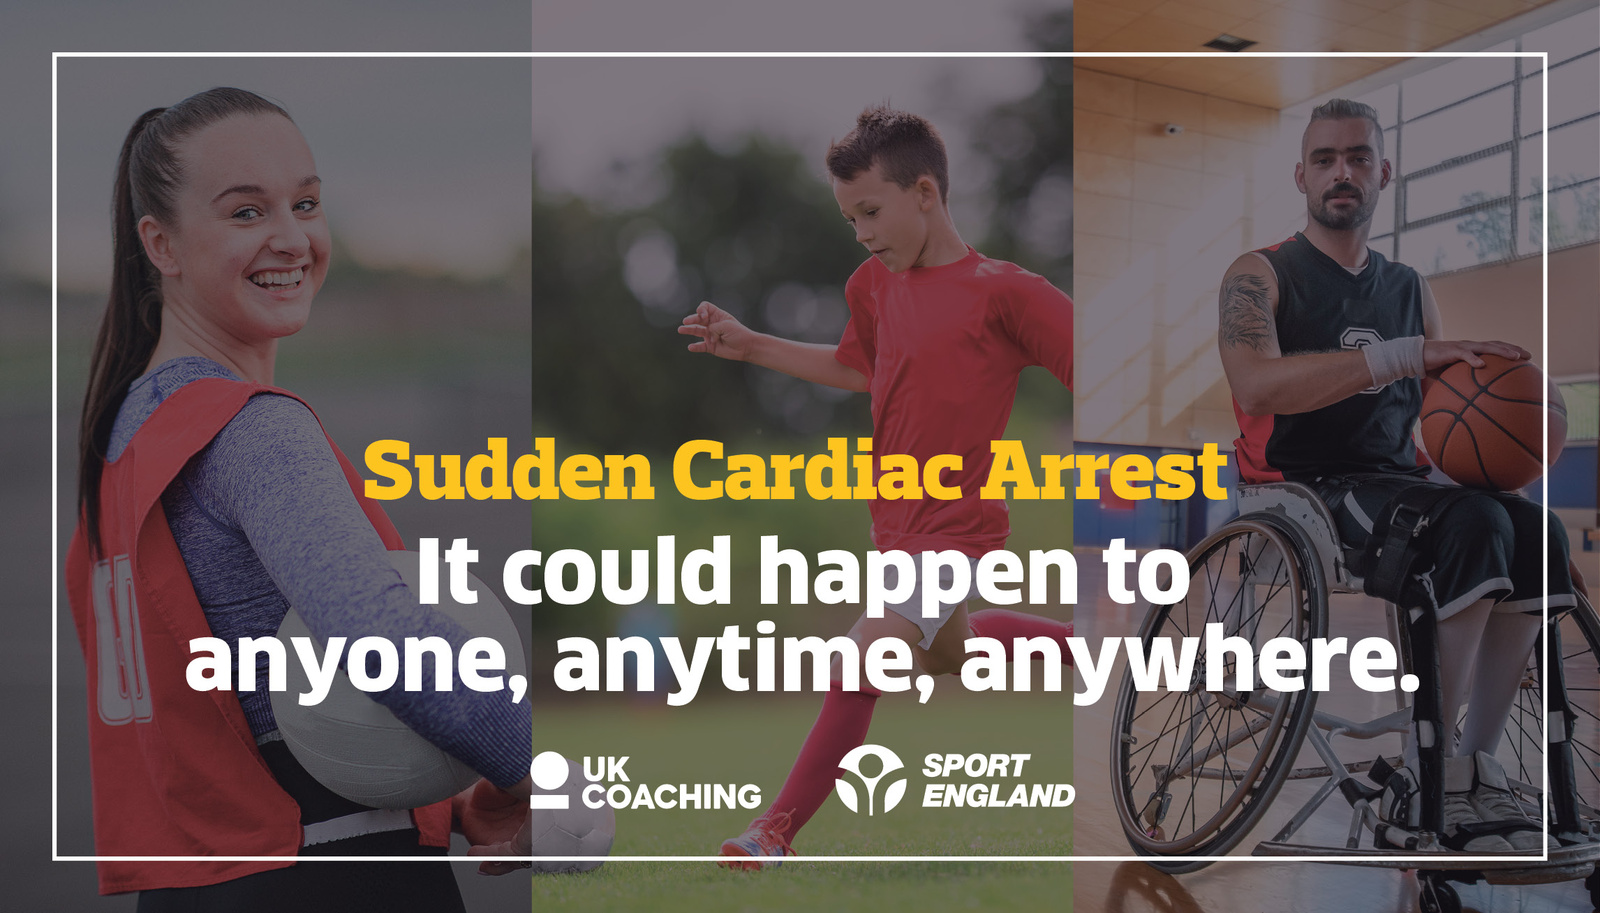 Learn to be quick, be smart and restart a heart 